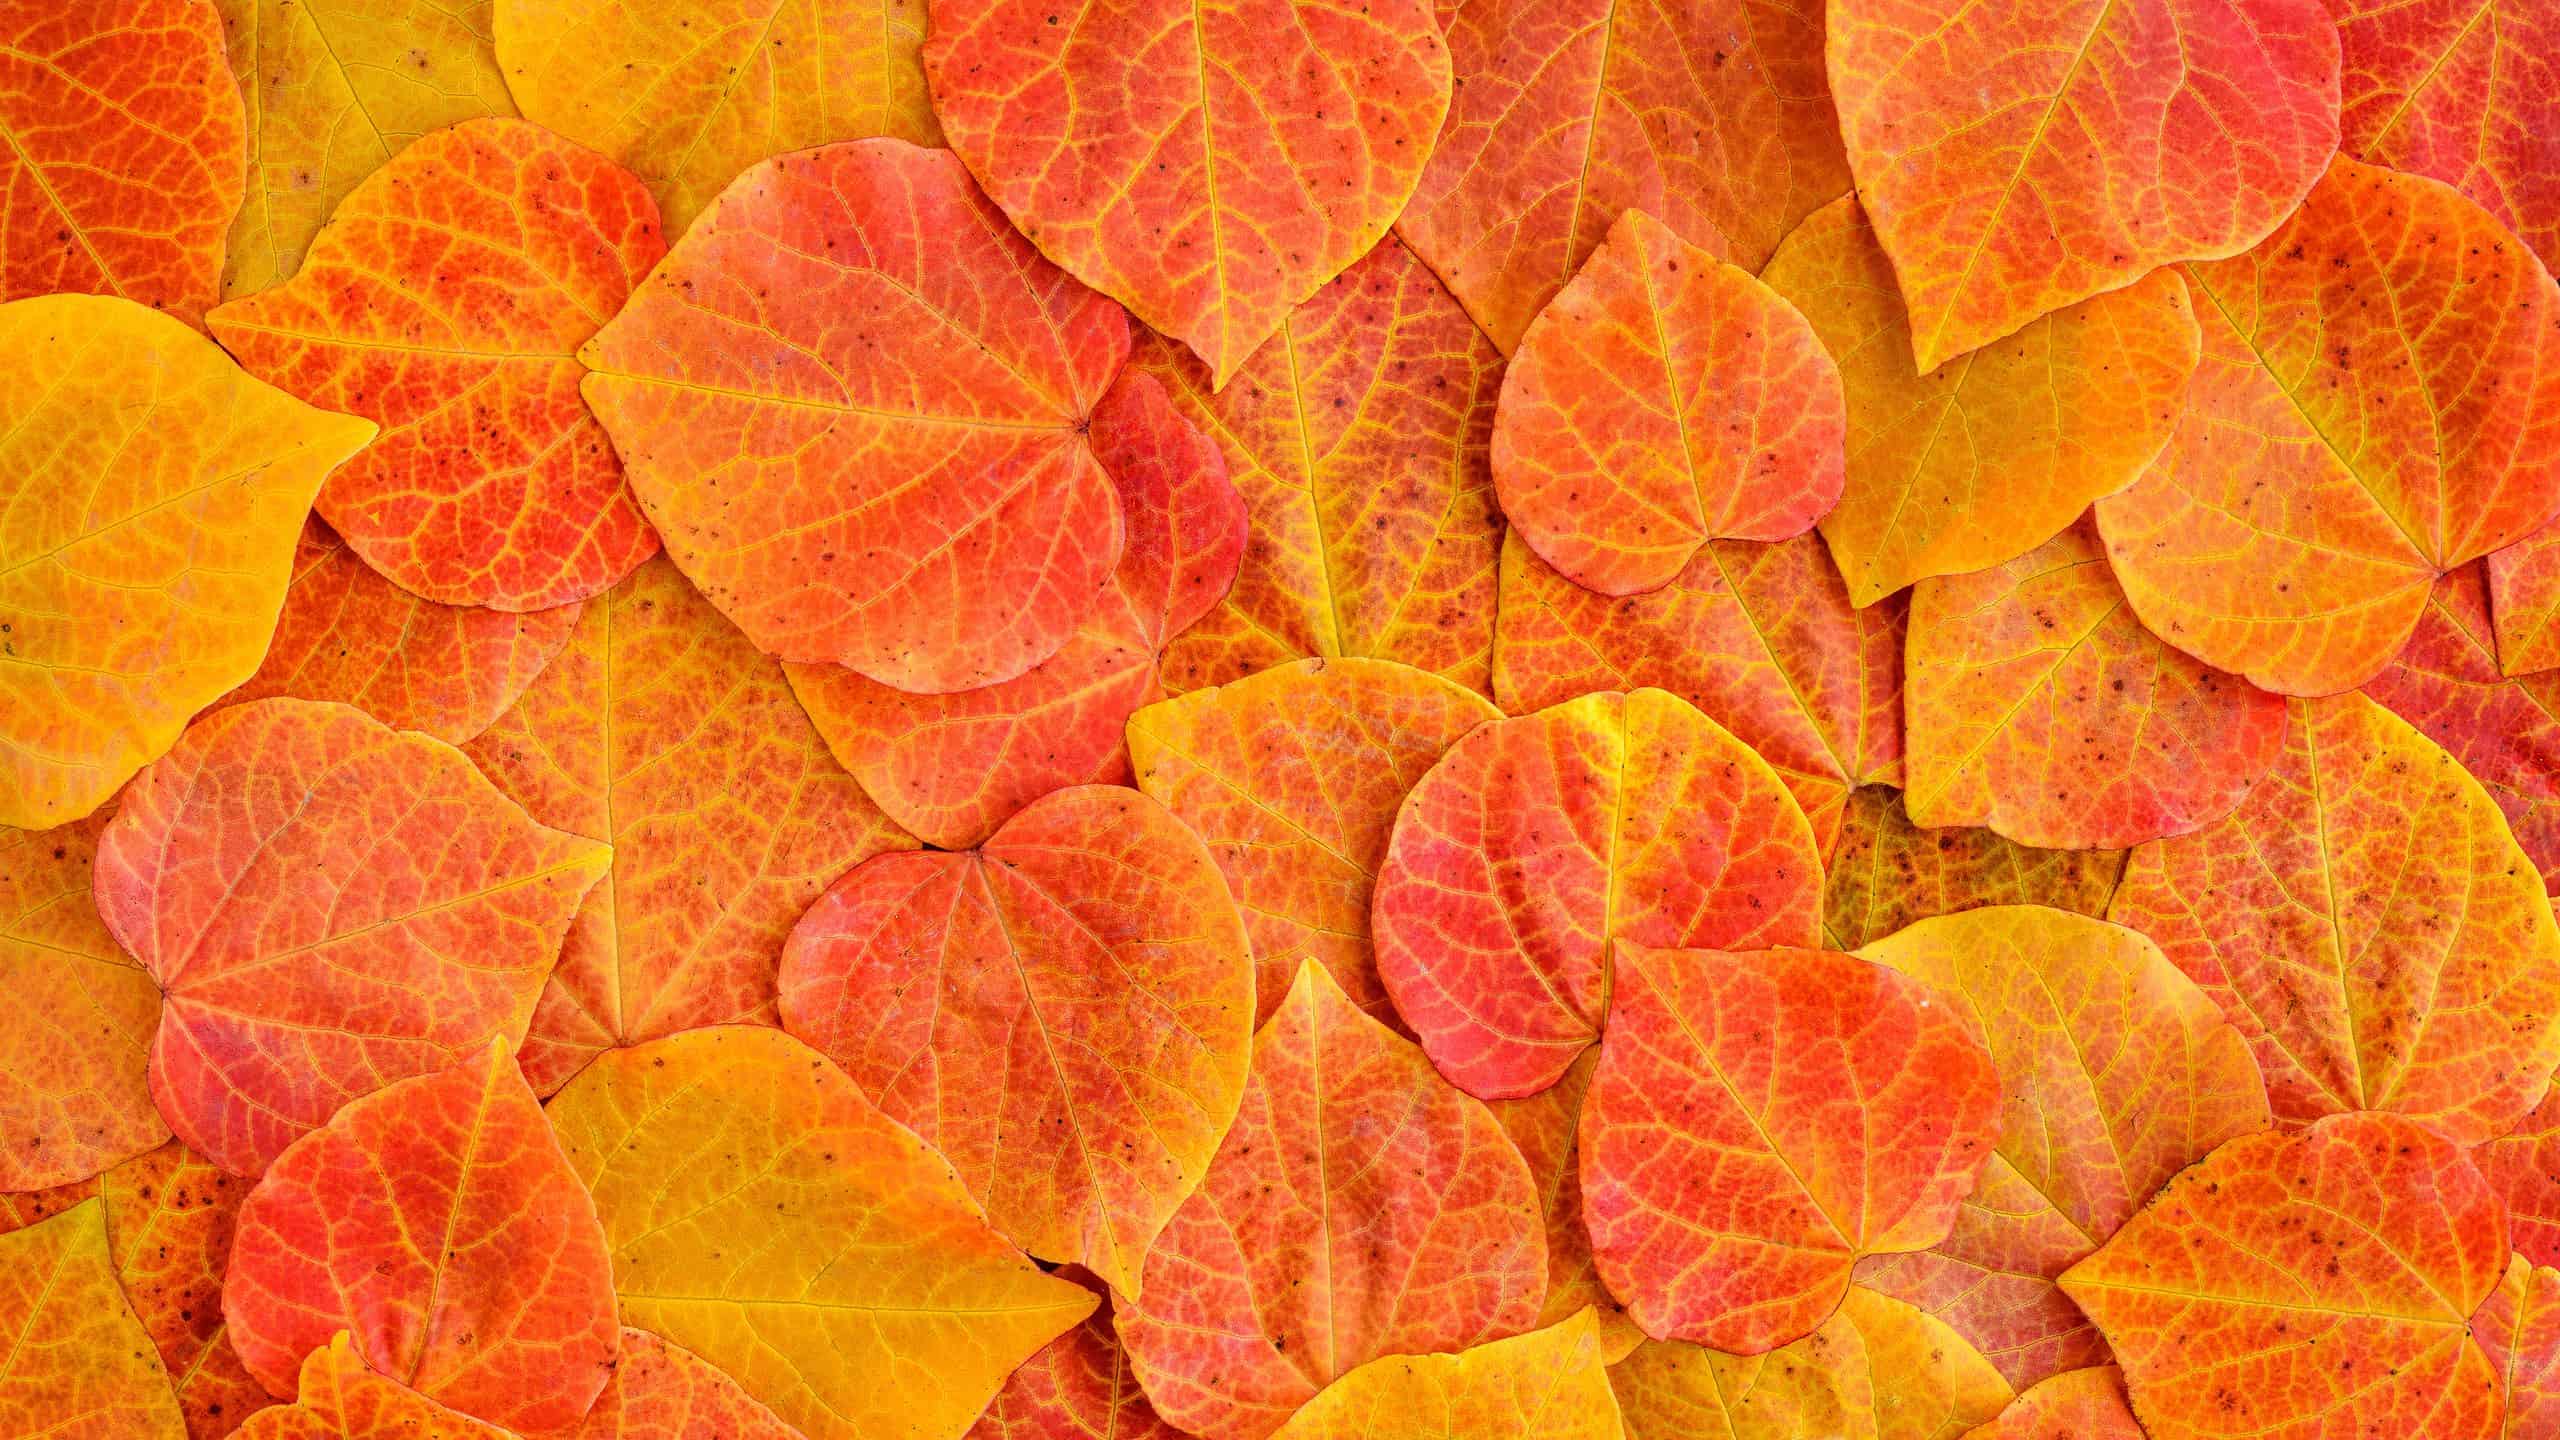 Redbud leaves in oranges, yellows, and reds